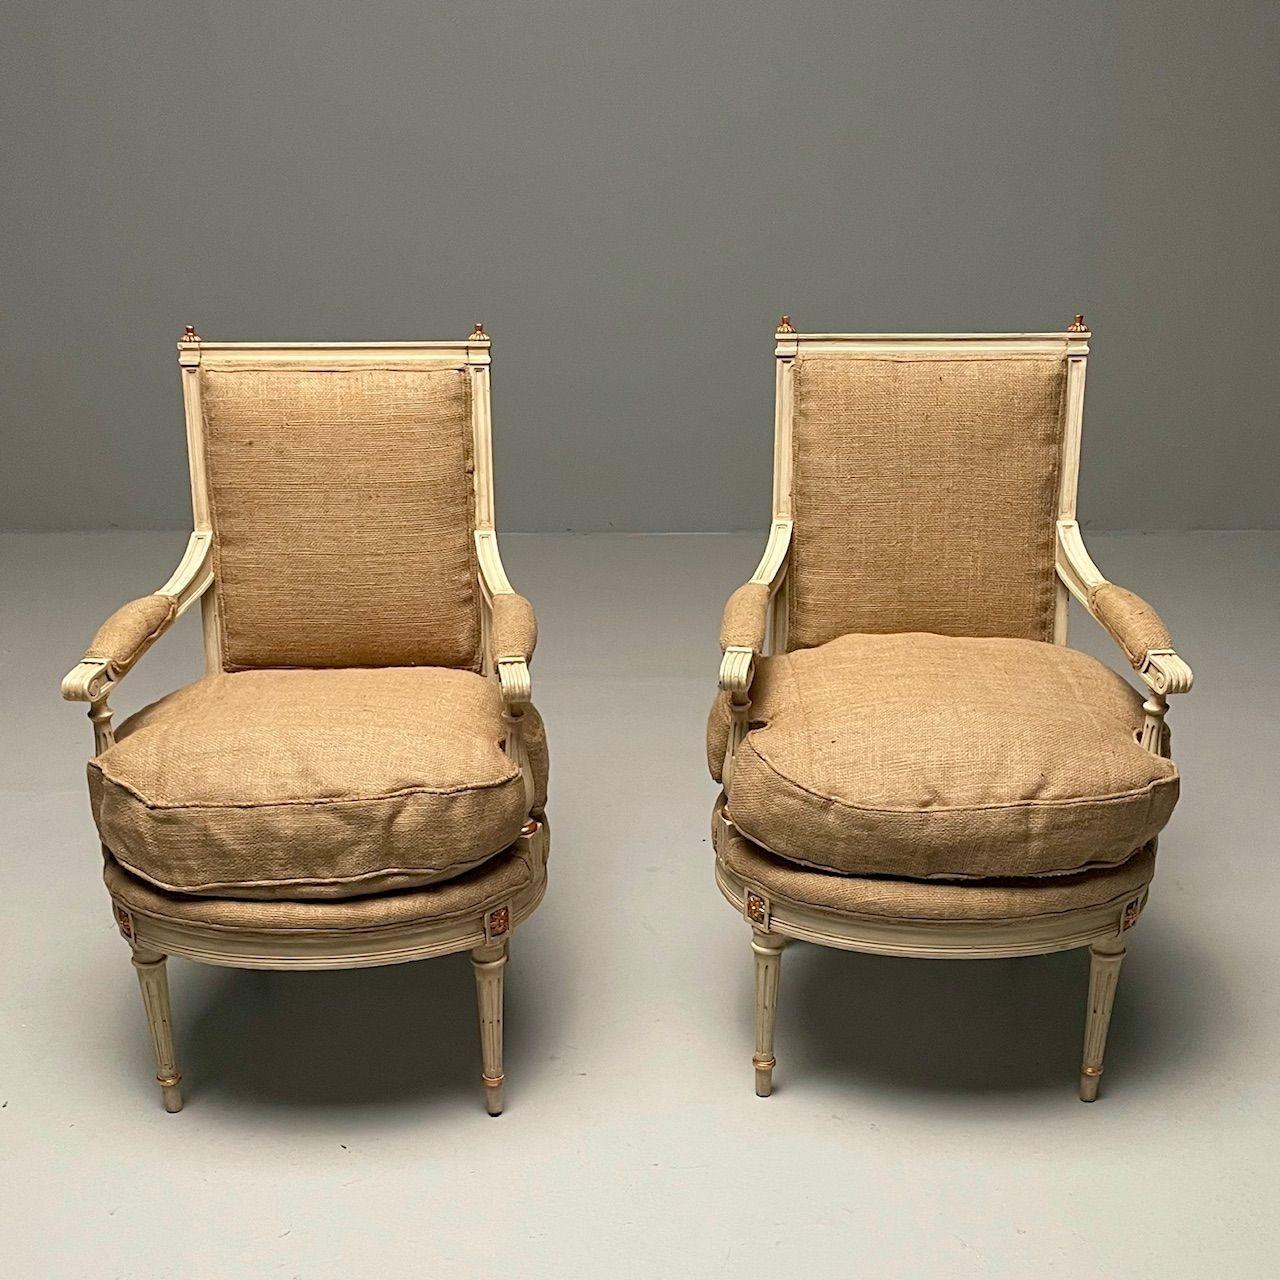 Maison Jansen Style, French Louis XVI, Arm Chairs, Giltwood, White Paint, Burlap

Pair of French Louis XVI style arm chairs newly re-upholstered in burlap fabric. This finely constructed pair of Maison Jansen inspired chairs are sleek and stylish in